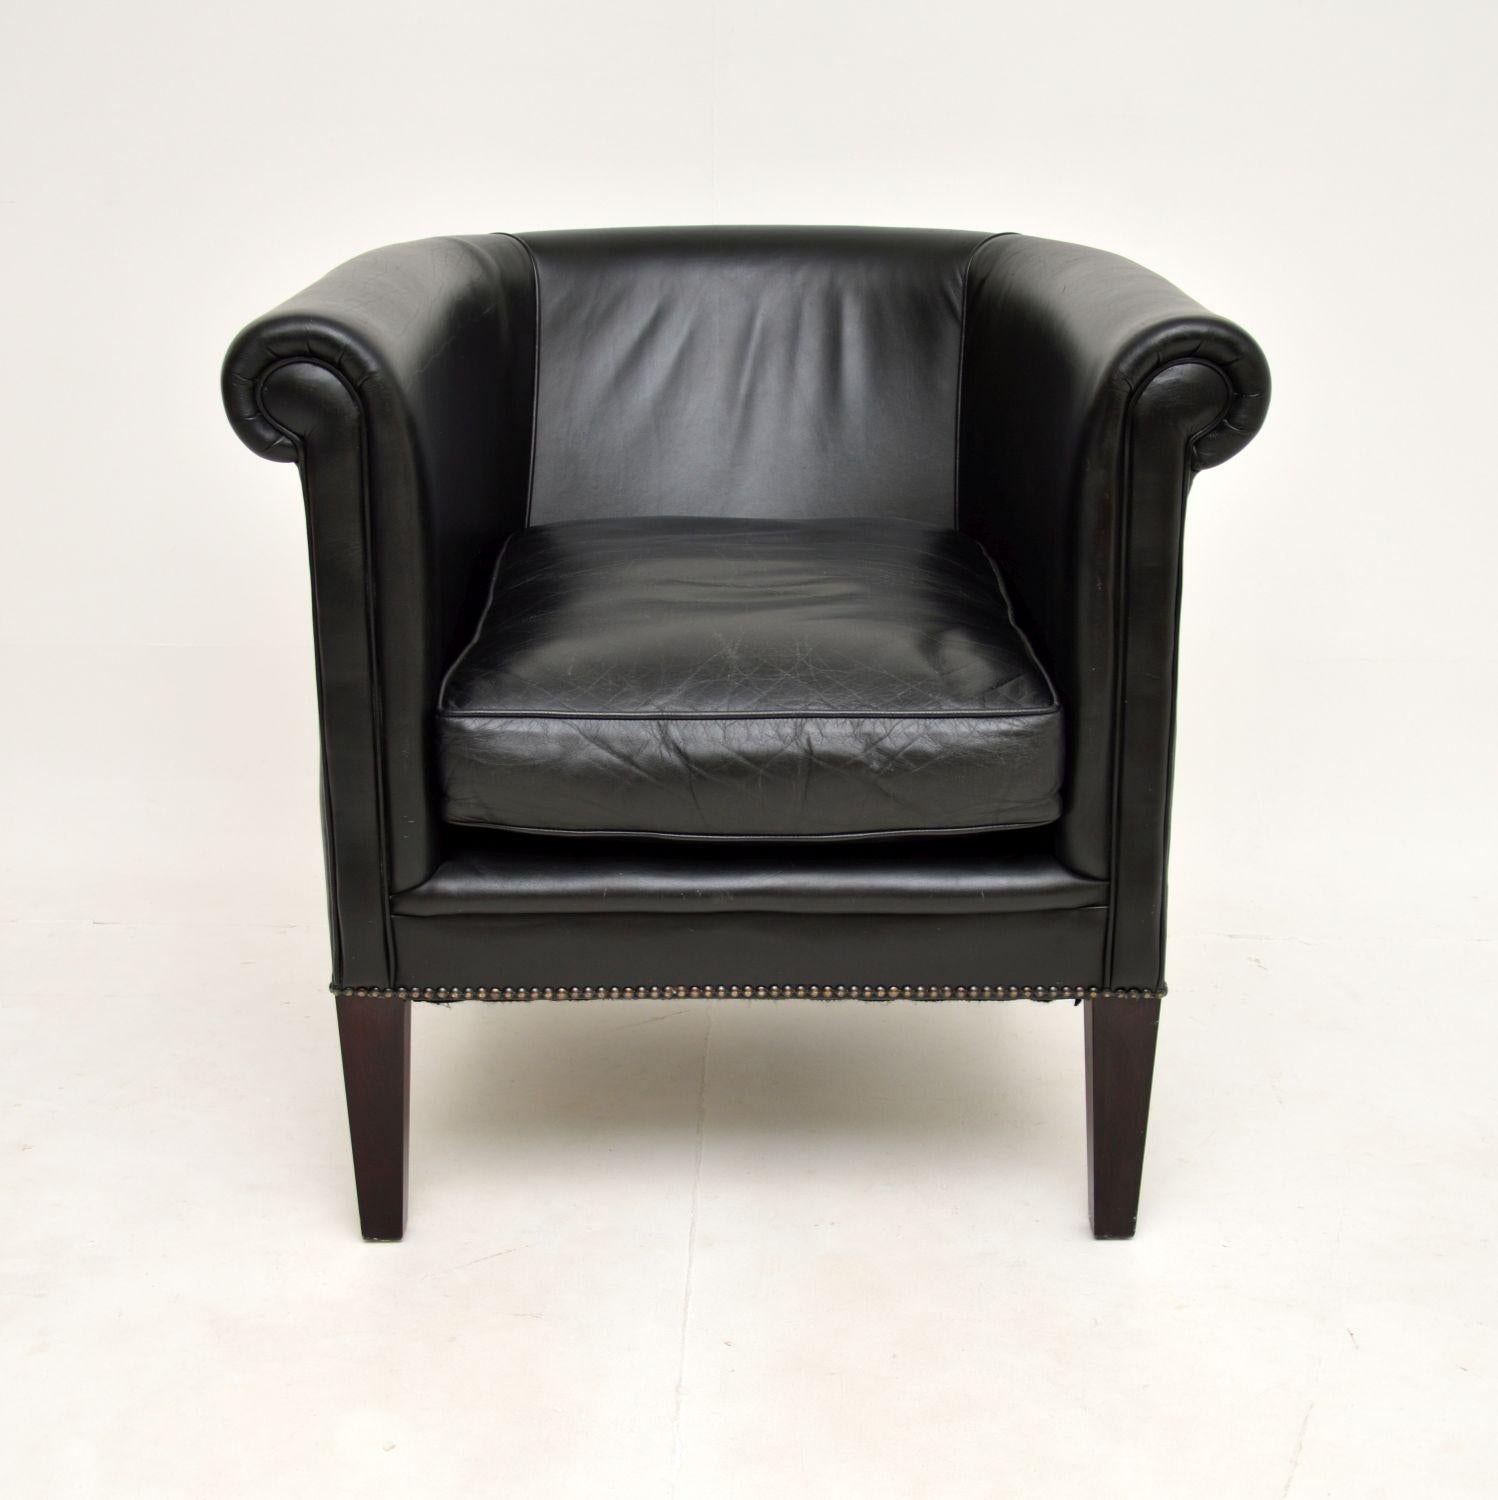 A stylish and extremely well made antique Georgian style leather armchair by Laura Ashley. This dates from the late 20th century.

It is beautifully designed, very comfortable and of superb quality.

The condition is excellent for its age, the black